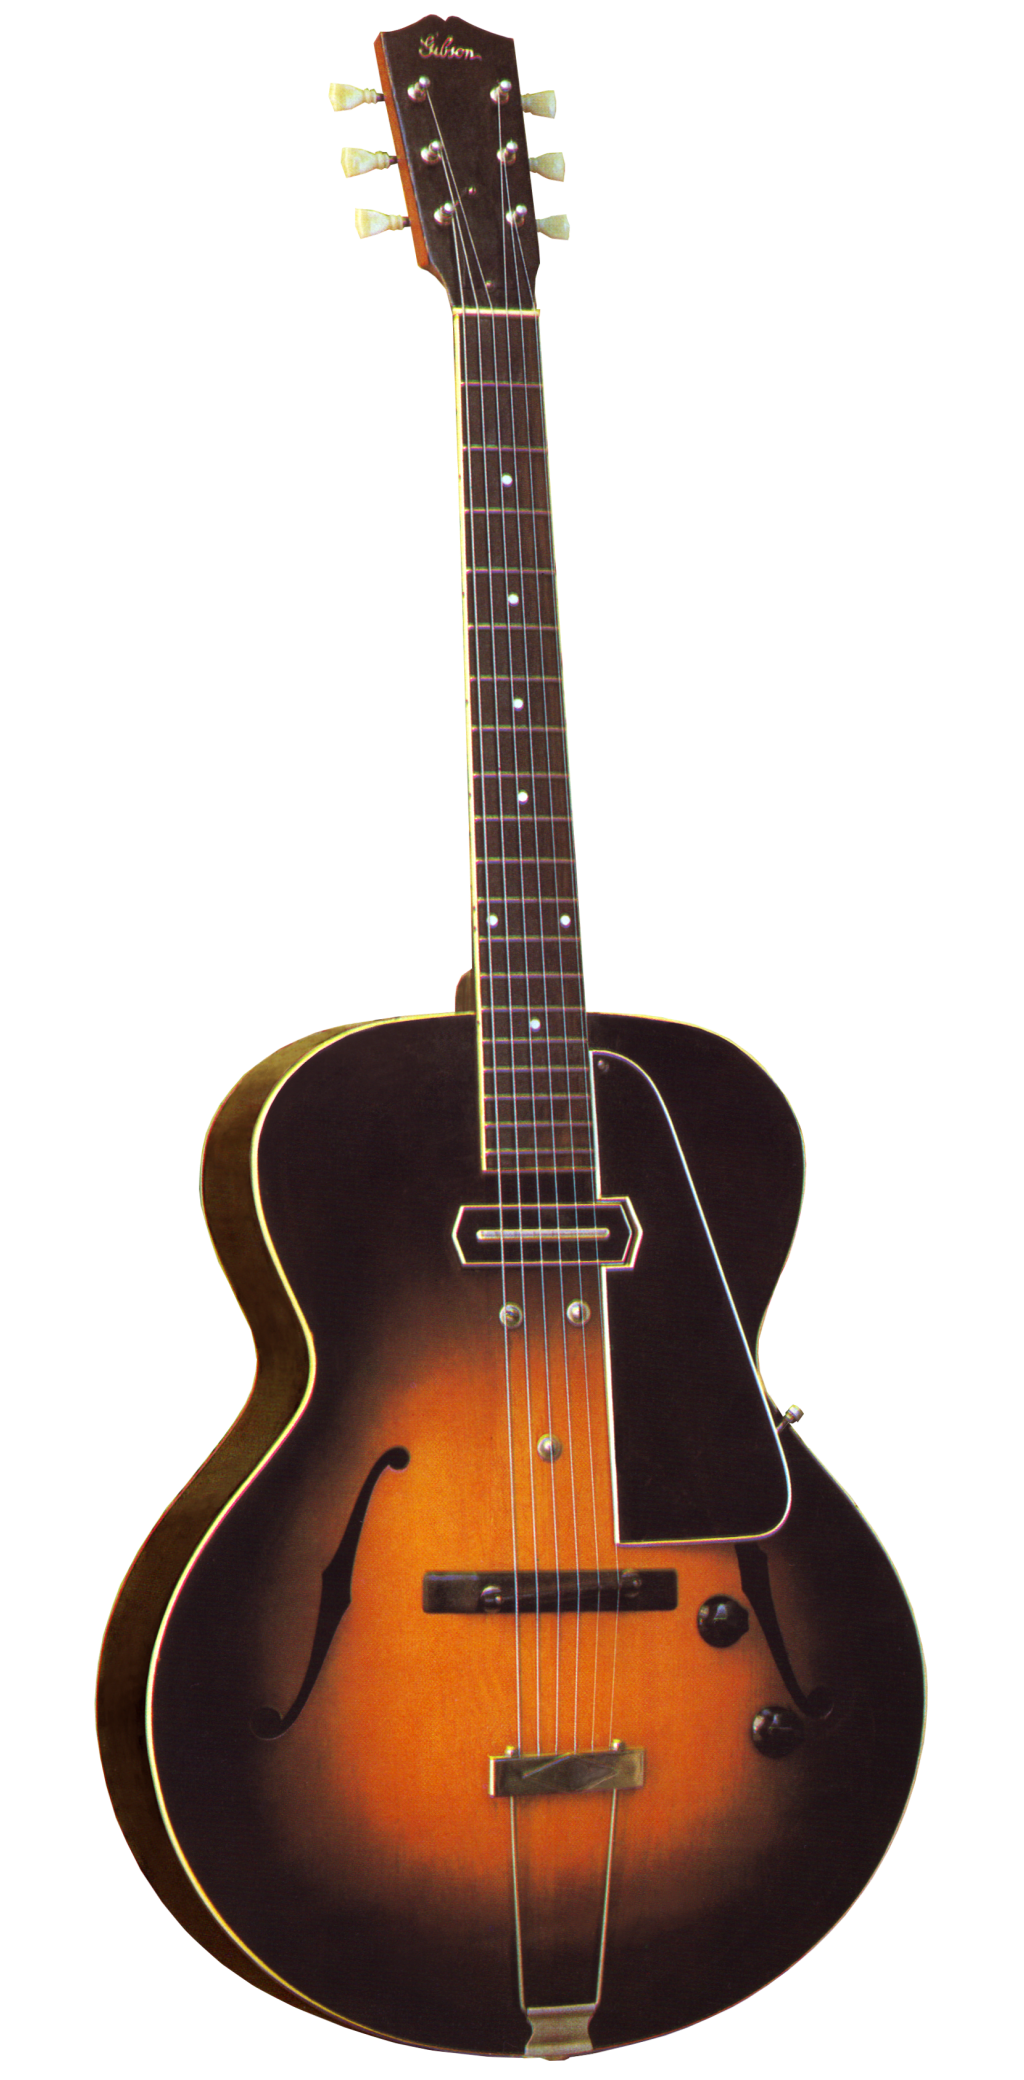 File:Gibson ES-150.png - Wikipedia, the free encyclopedia